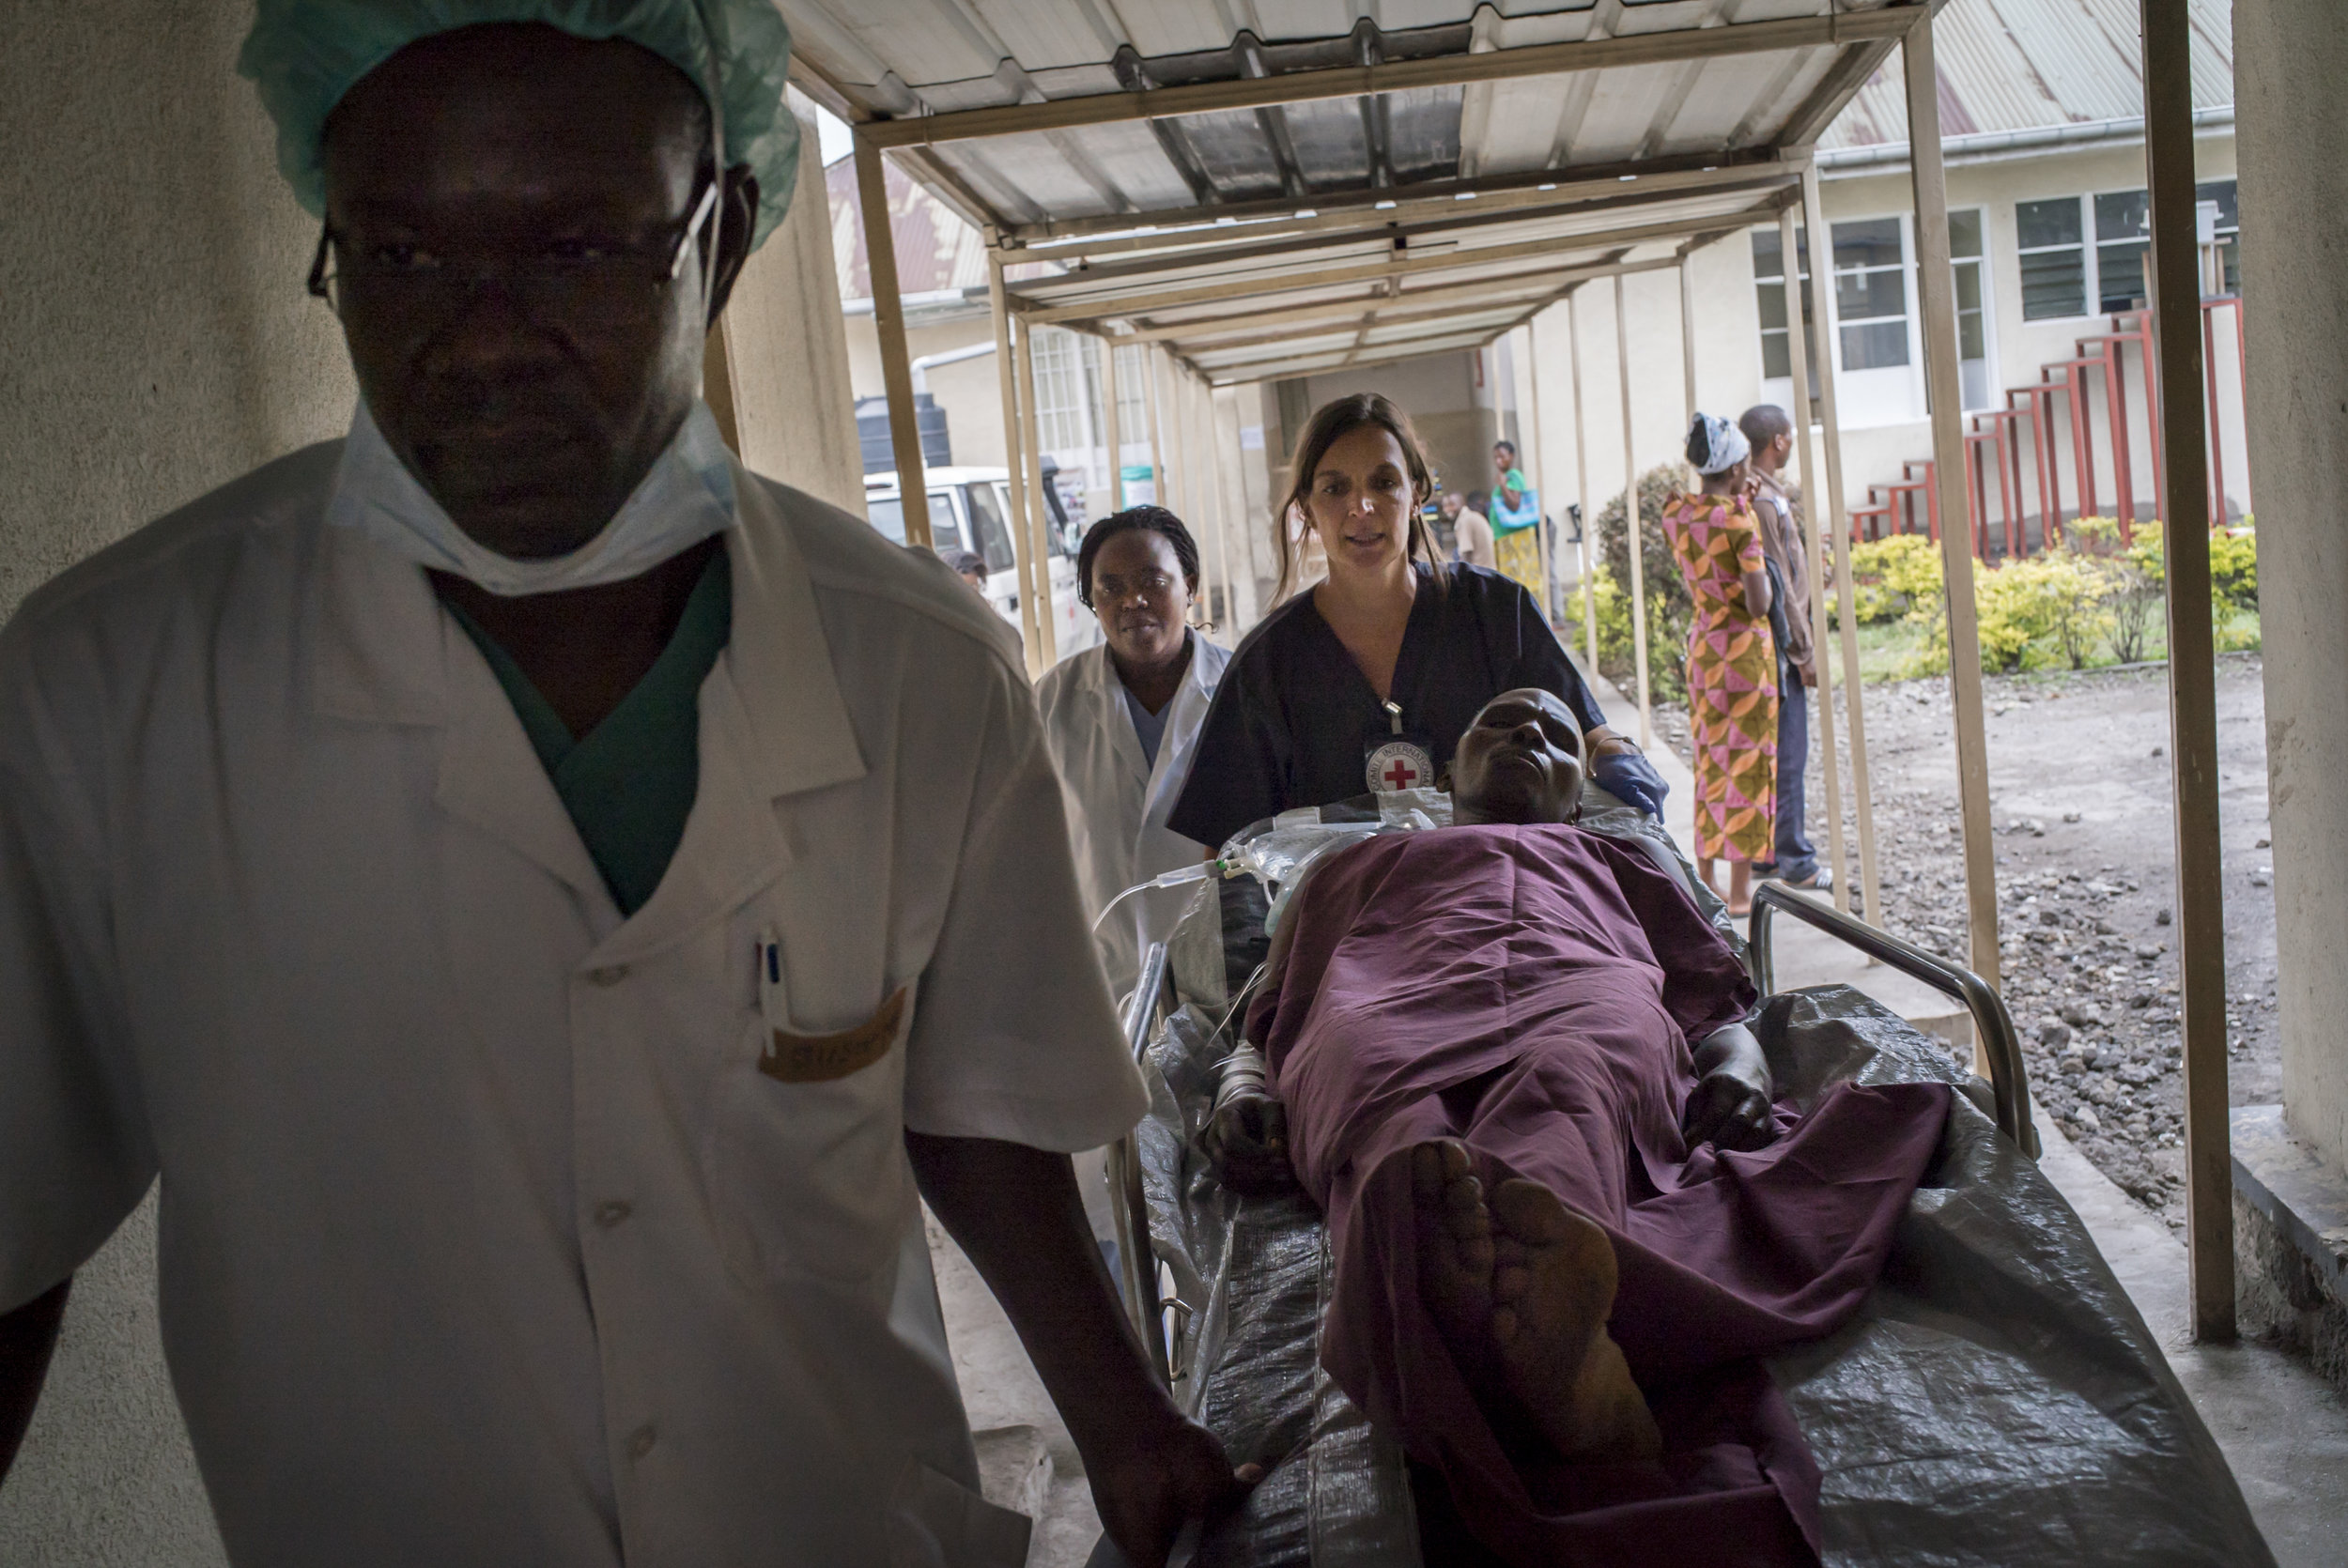  Patrick Gasana Wabazazo, 44, is rushed into an emergency surgery at Ndosho hospital in Goma, Congo. Patrick was shot in the chest when he was caught in a crossfire between armed men on his farmland, one hour from his home village of Nyanzale, in Rut